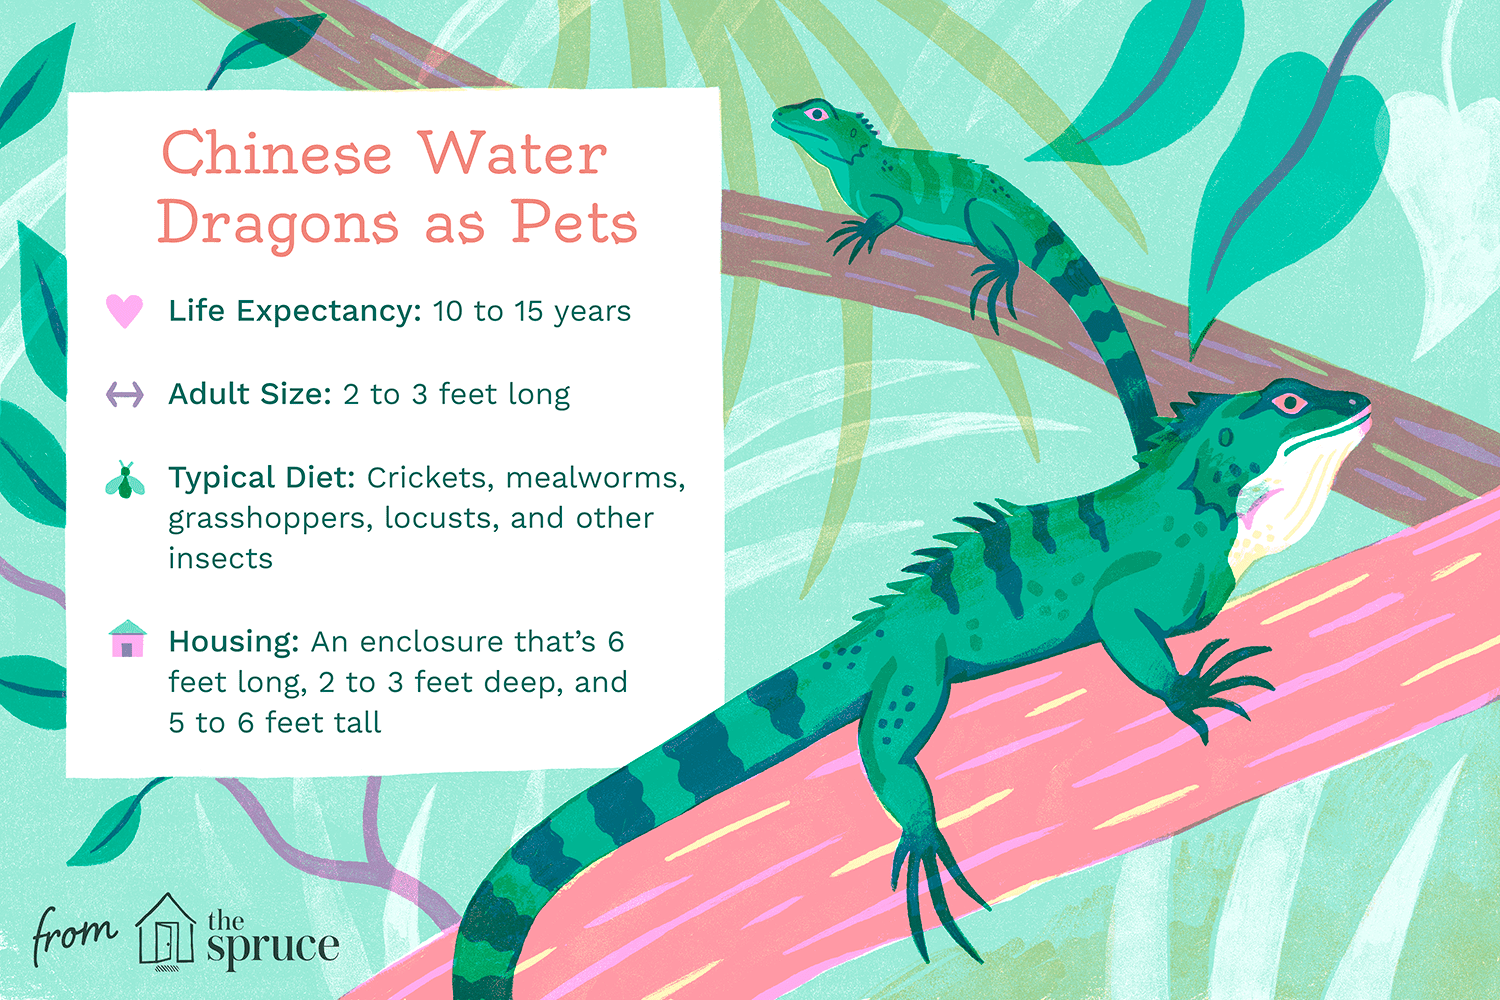 Illustration of Chinese water dragons as pets.